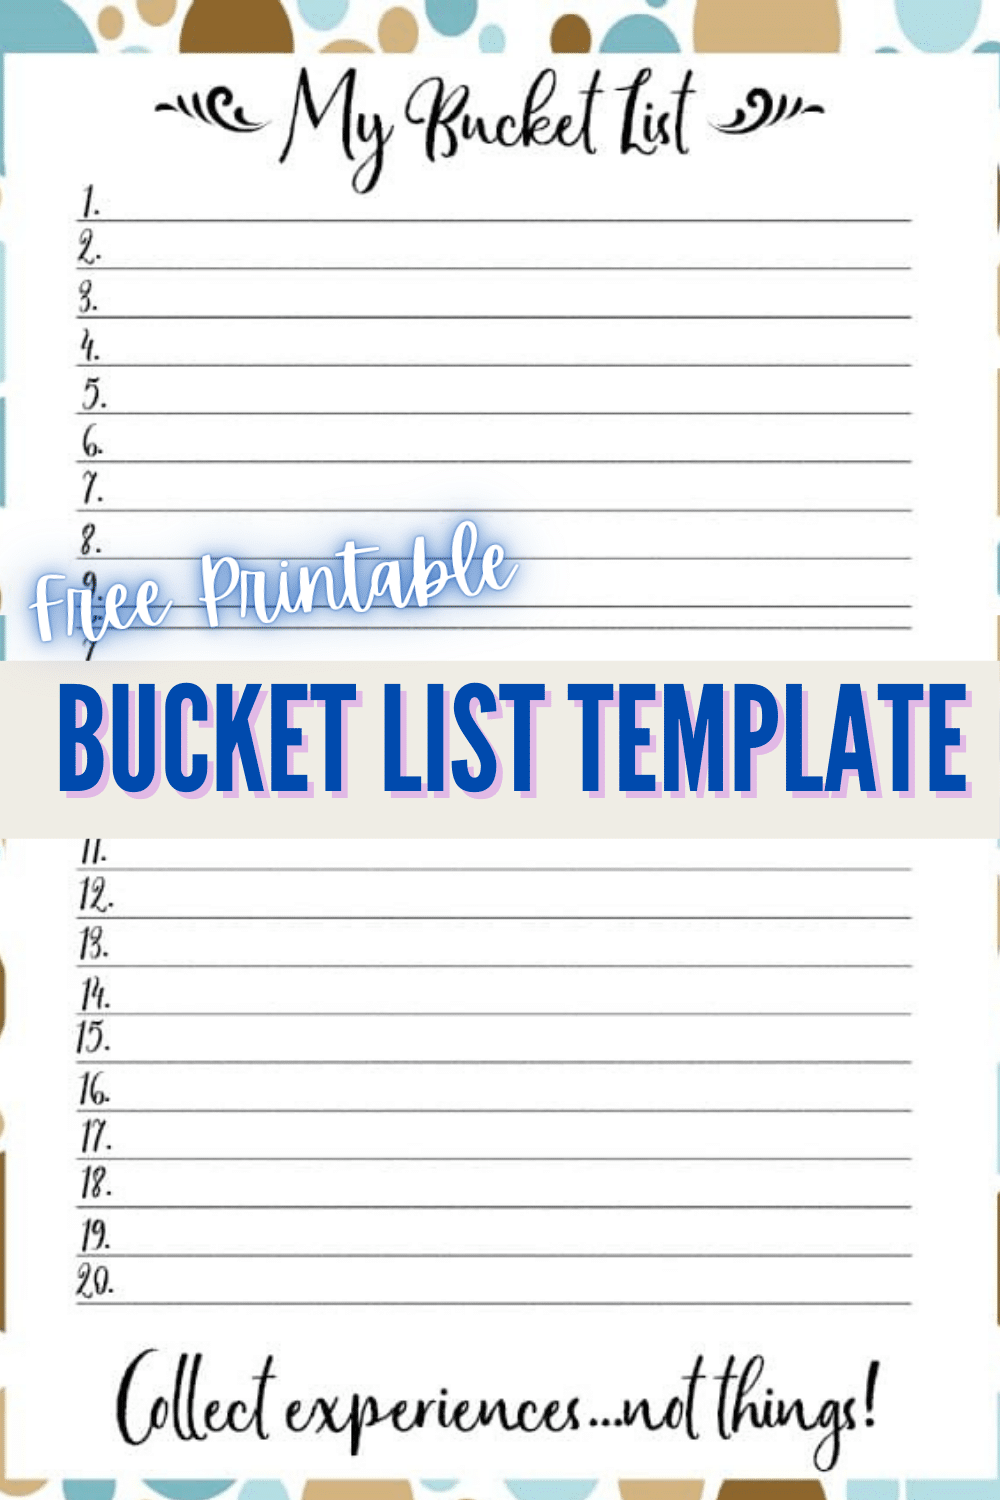 This free printable Bucket List Template will help you make your personal bucket list at home. It is fun to create a bucket list and start meeting goals. #bucketlist #printable #freeprintable via @wondermomwannab